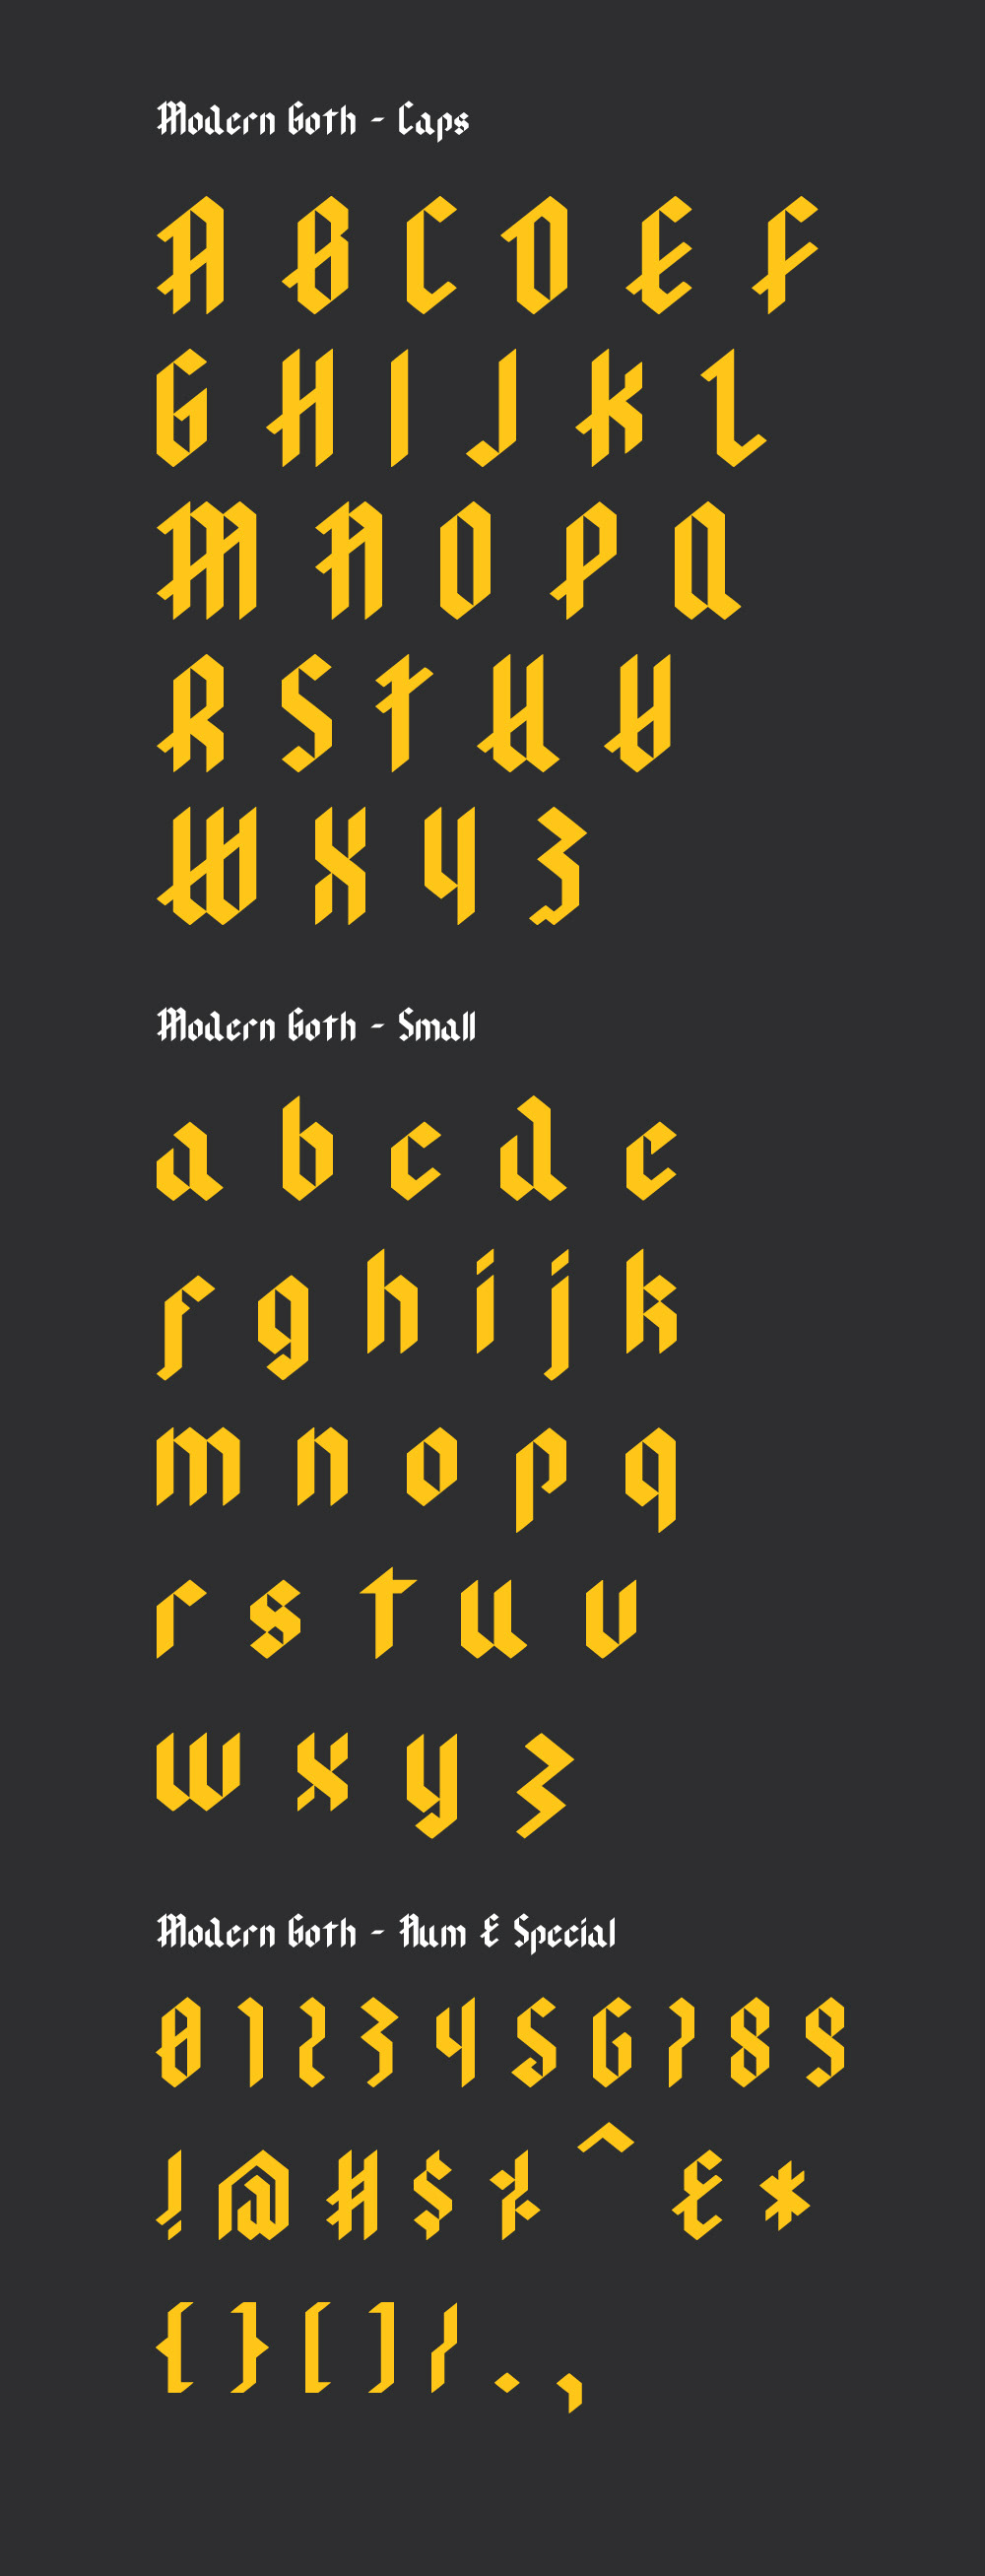 free fonts bold fonts gothic font typography   Typeface fonts Calligraphy  